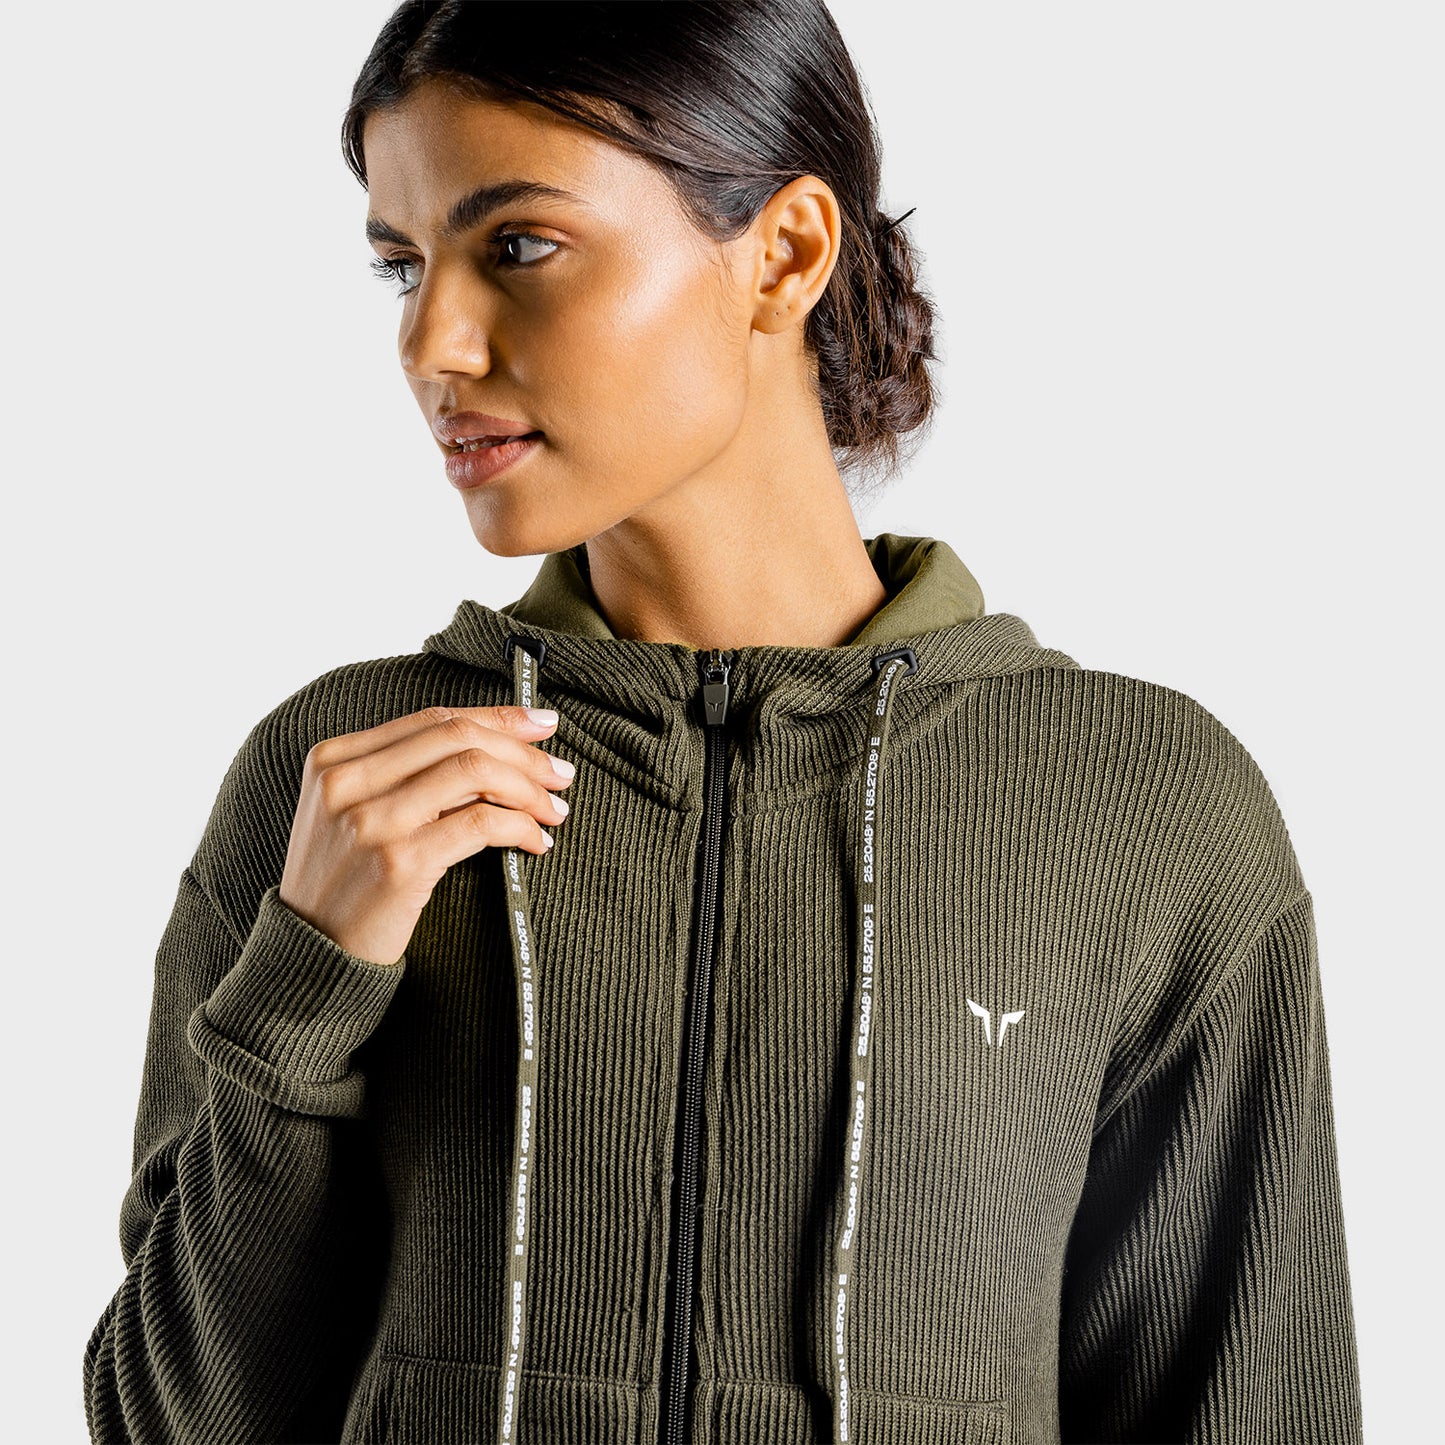 squatwolf-gym-hoodies-women-luxe-zip-up-olive-workout-clothes